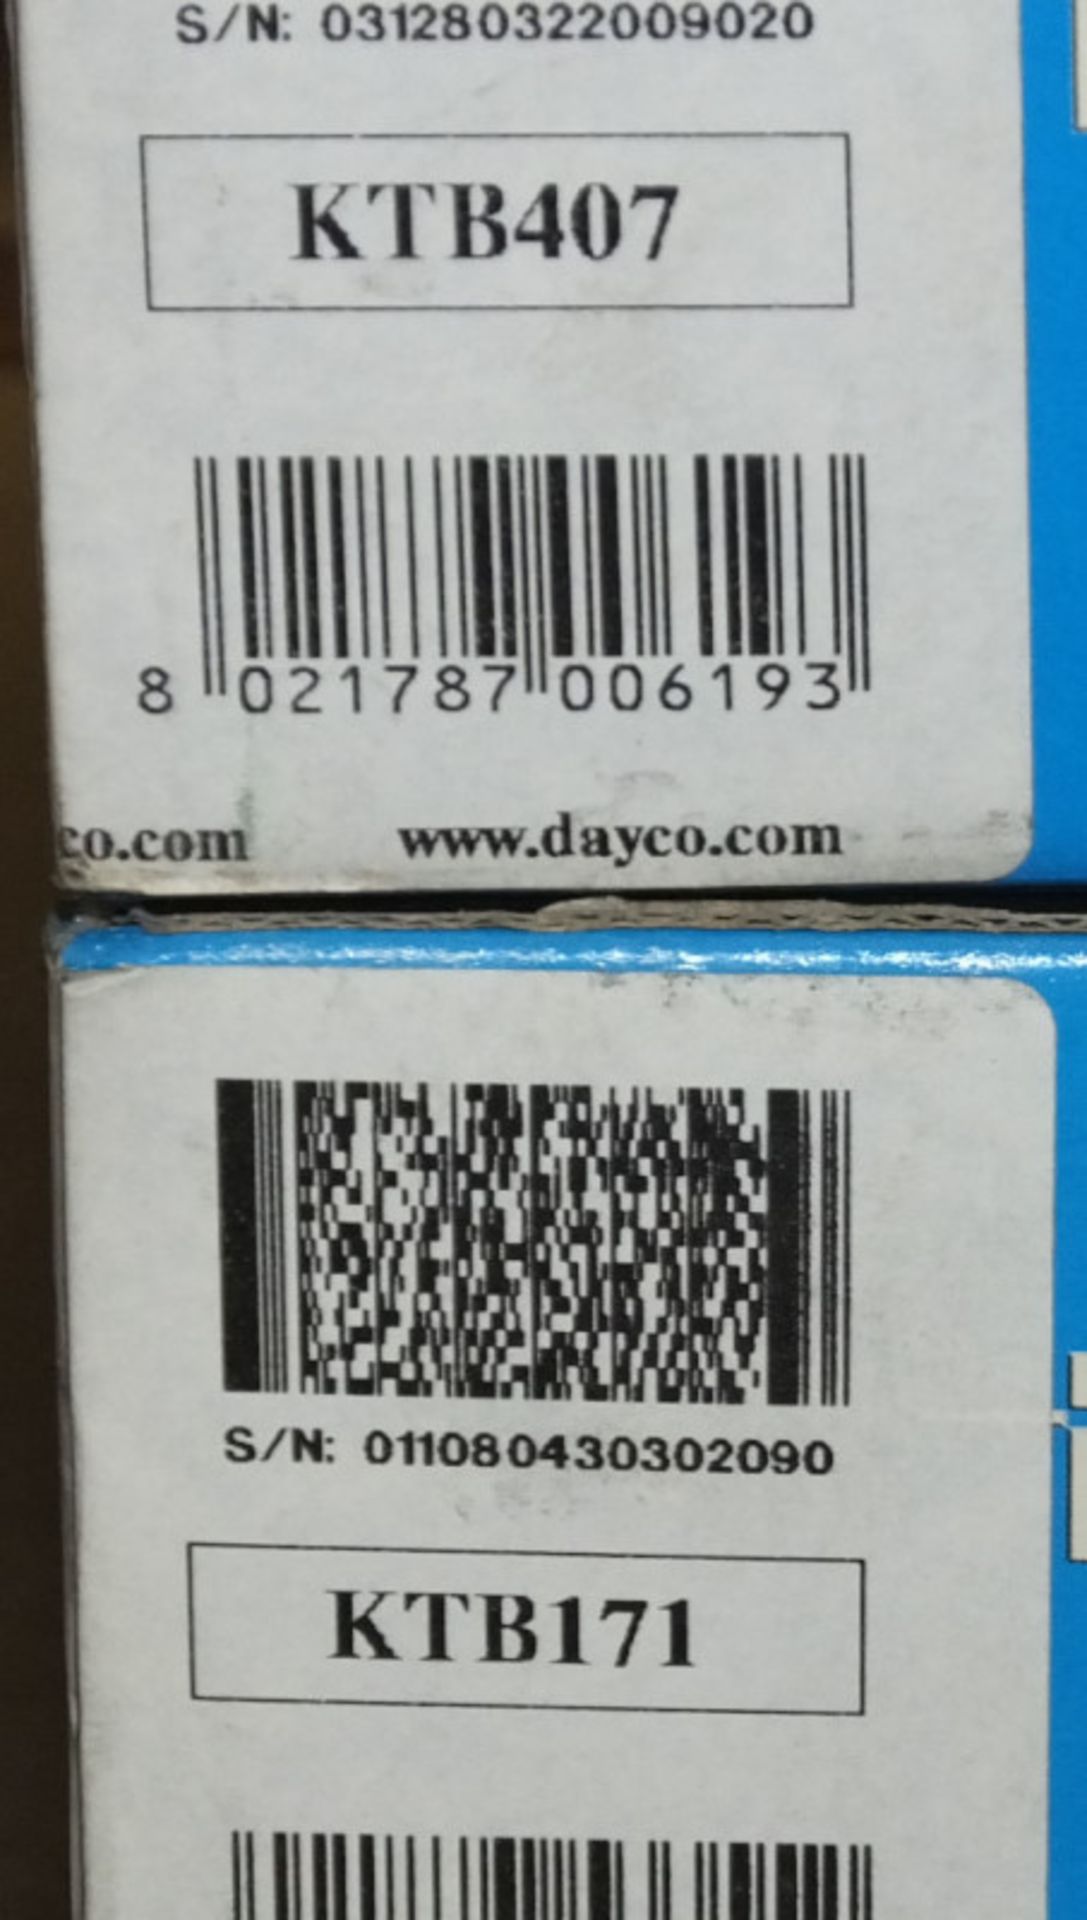 6x Dayco Timing Belt Kits - Please see pictures for model numbers - Image 2 of 4